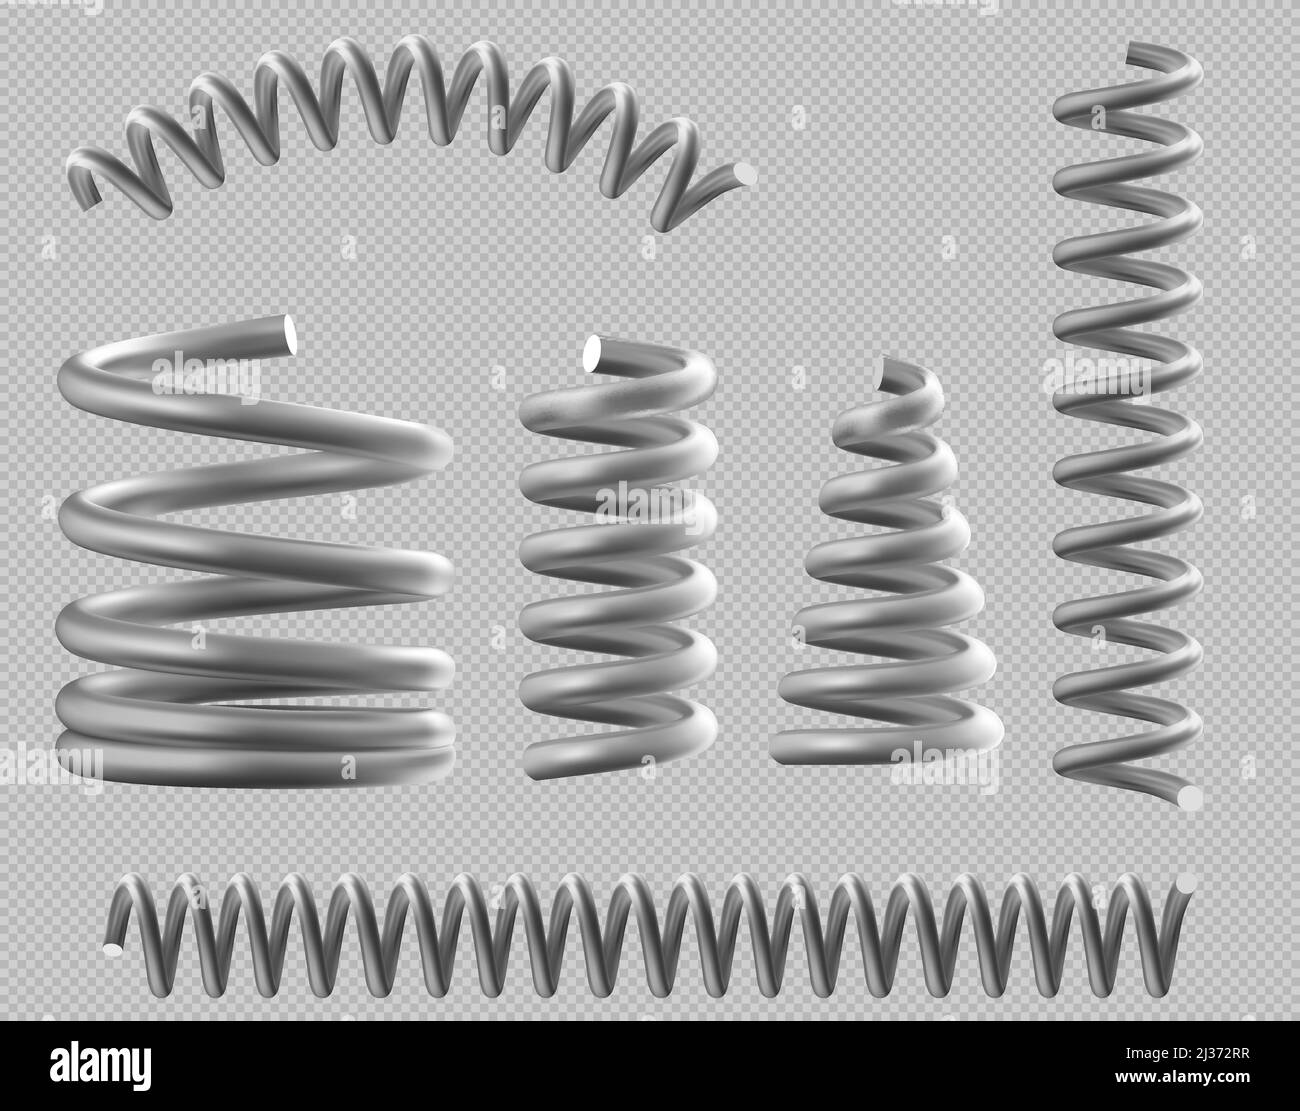 Metal springs, realistic coils for bed or car, flexible spiral parts set isolated on transparent background. Steel industrial or mechanic garage equip Stock Vector